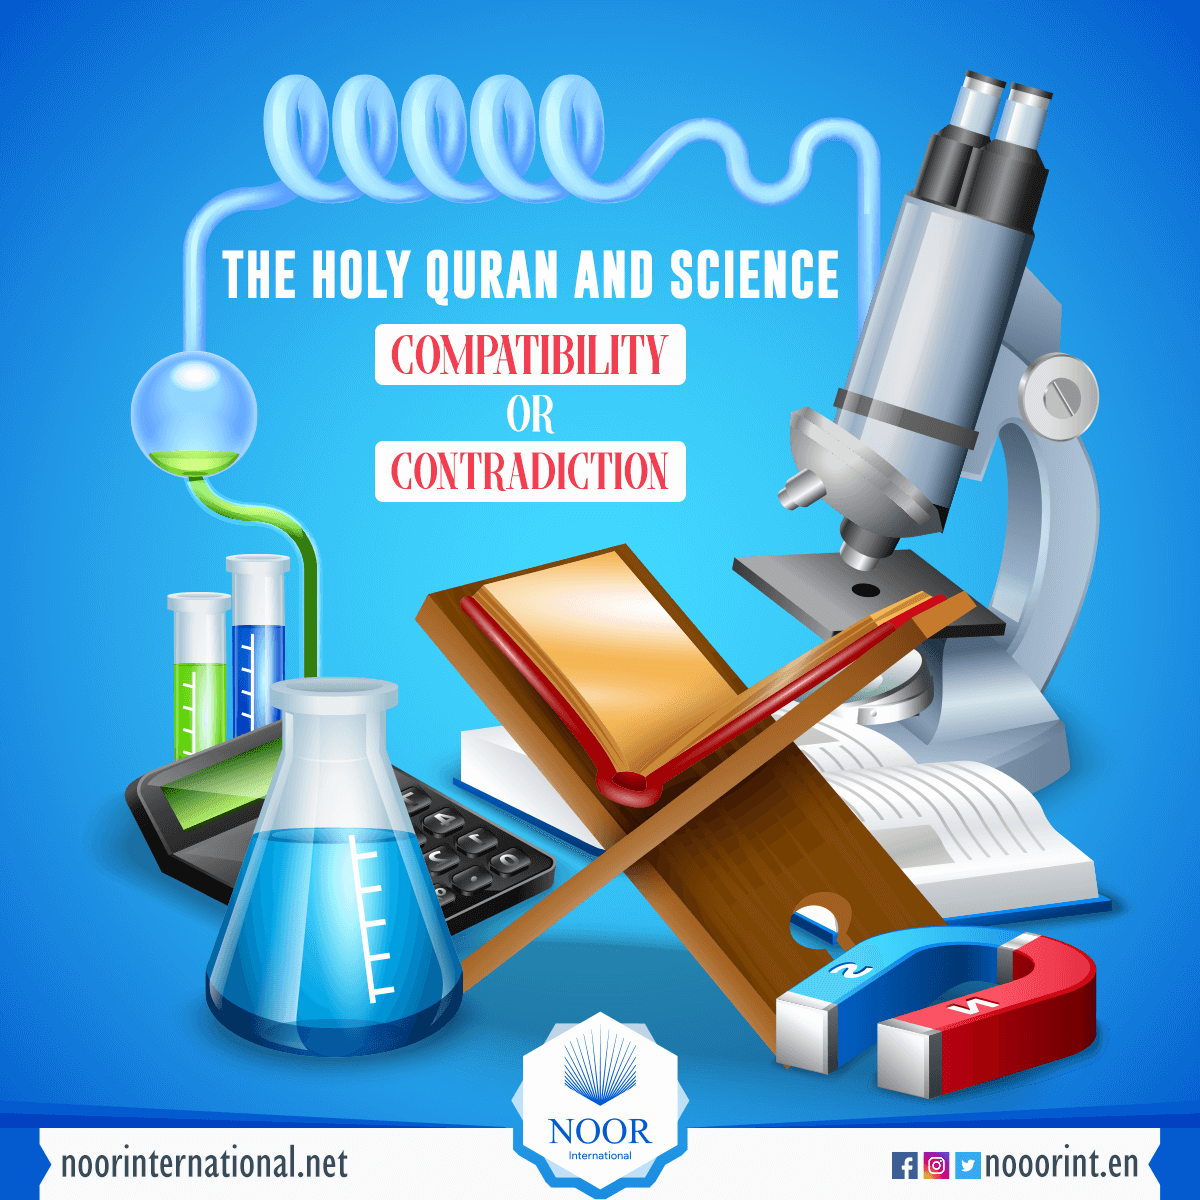 The holy Quran and science